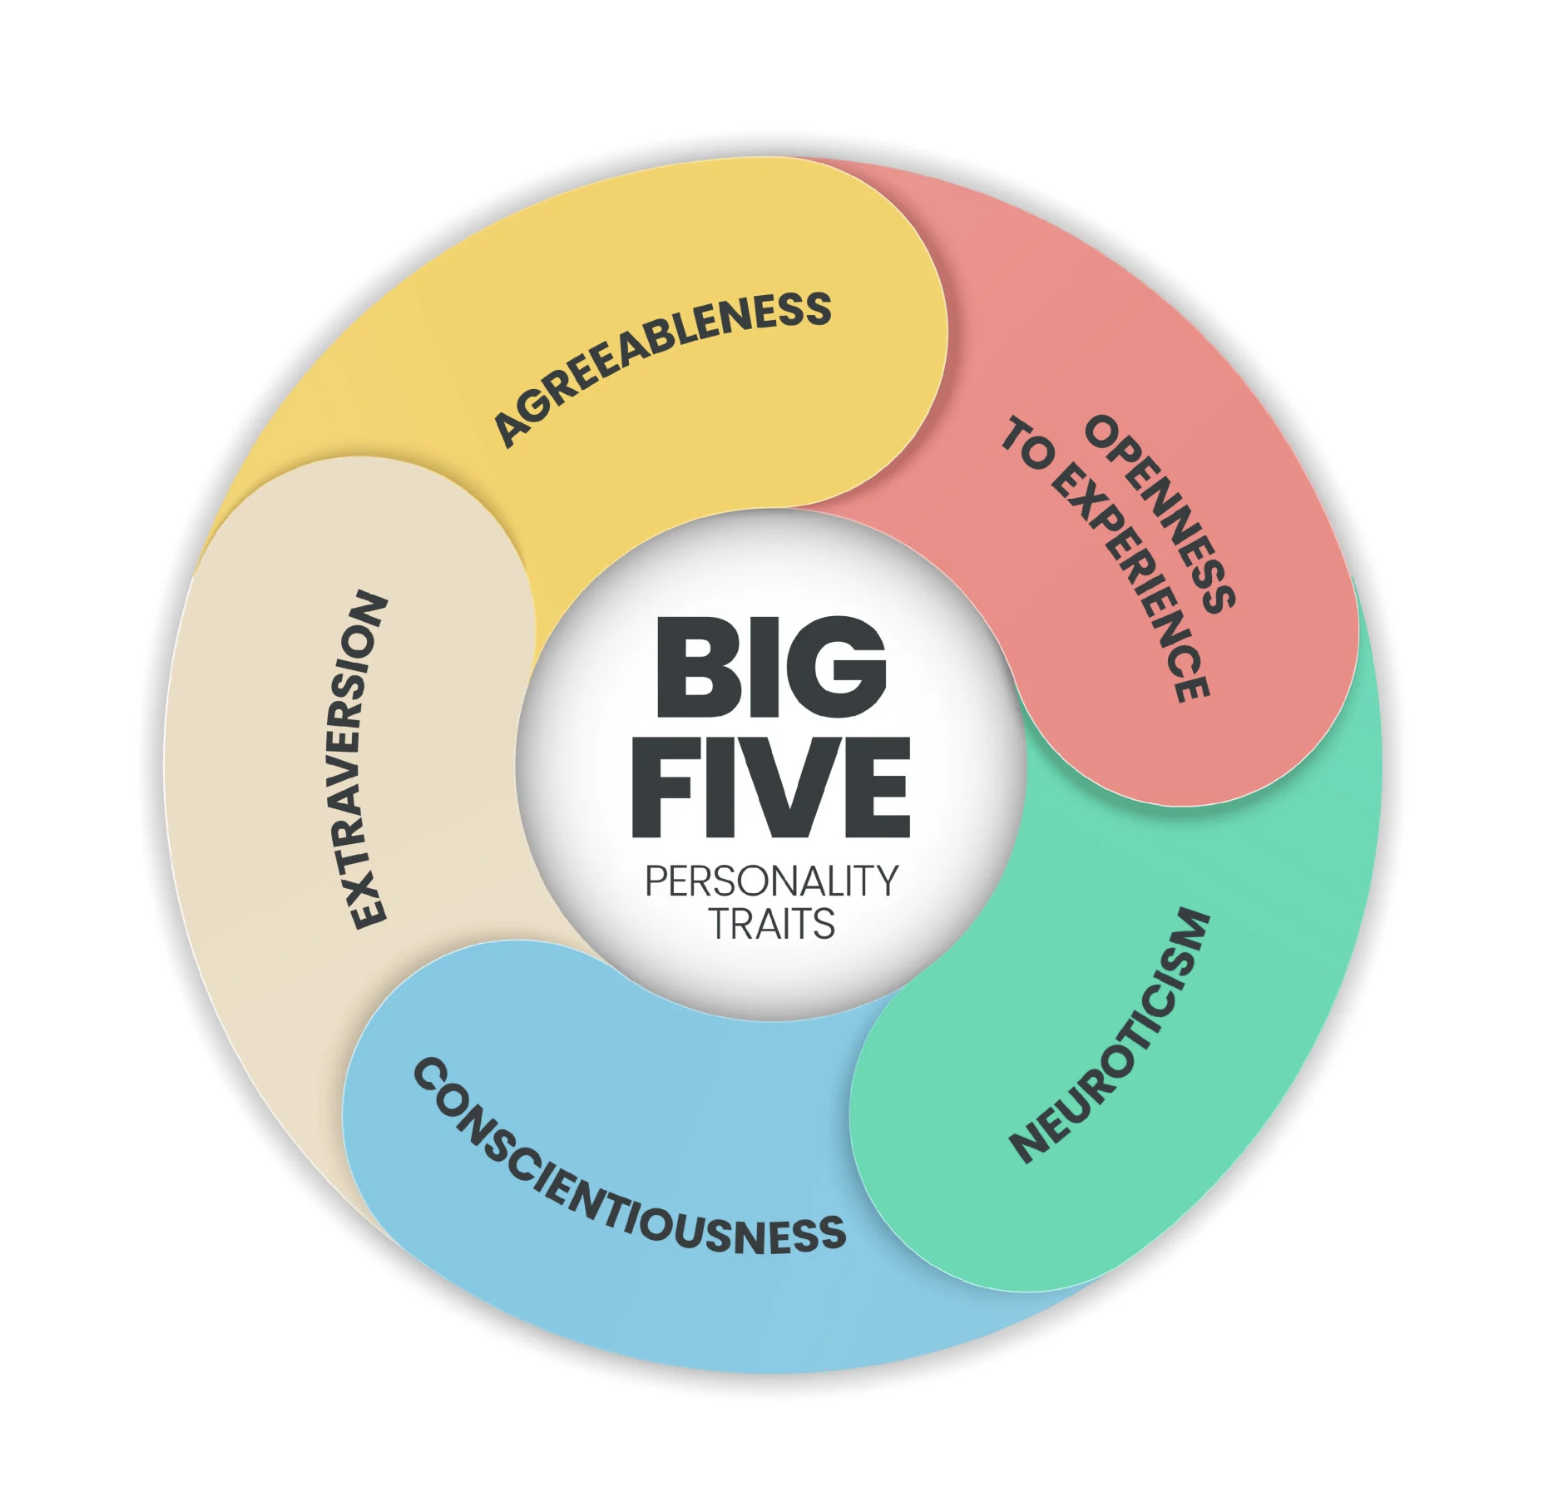 The Big 5 Personality Traits: A Framework for Understanding Our Differences